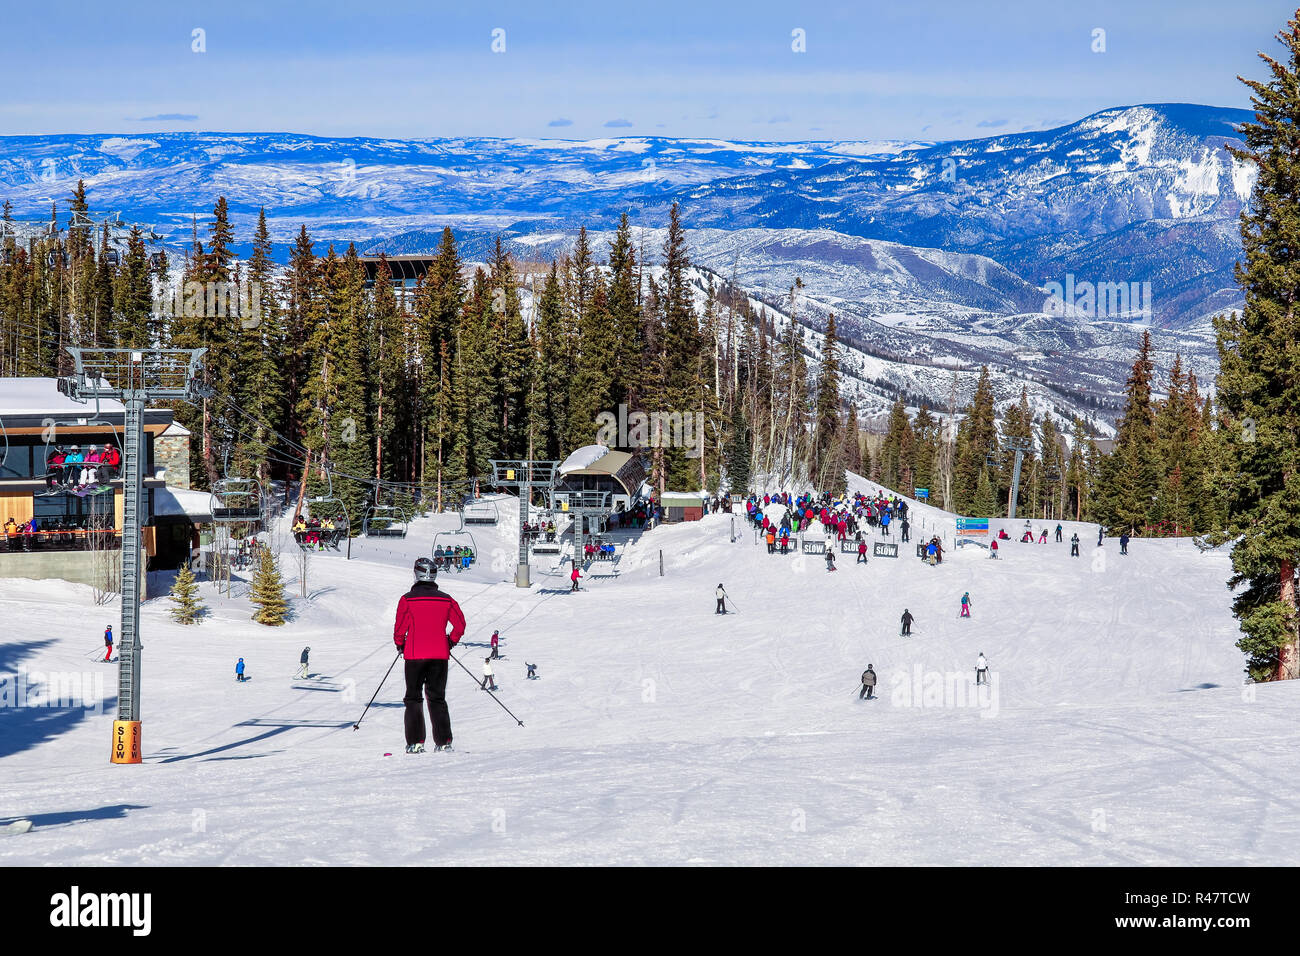 View of ski resort in Snowmass Mountain, Colorado, in the winter; skiers and snowboarders skiing down to the chairlift Stock Photo